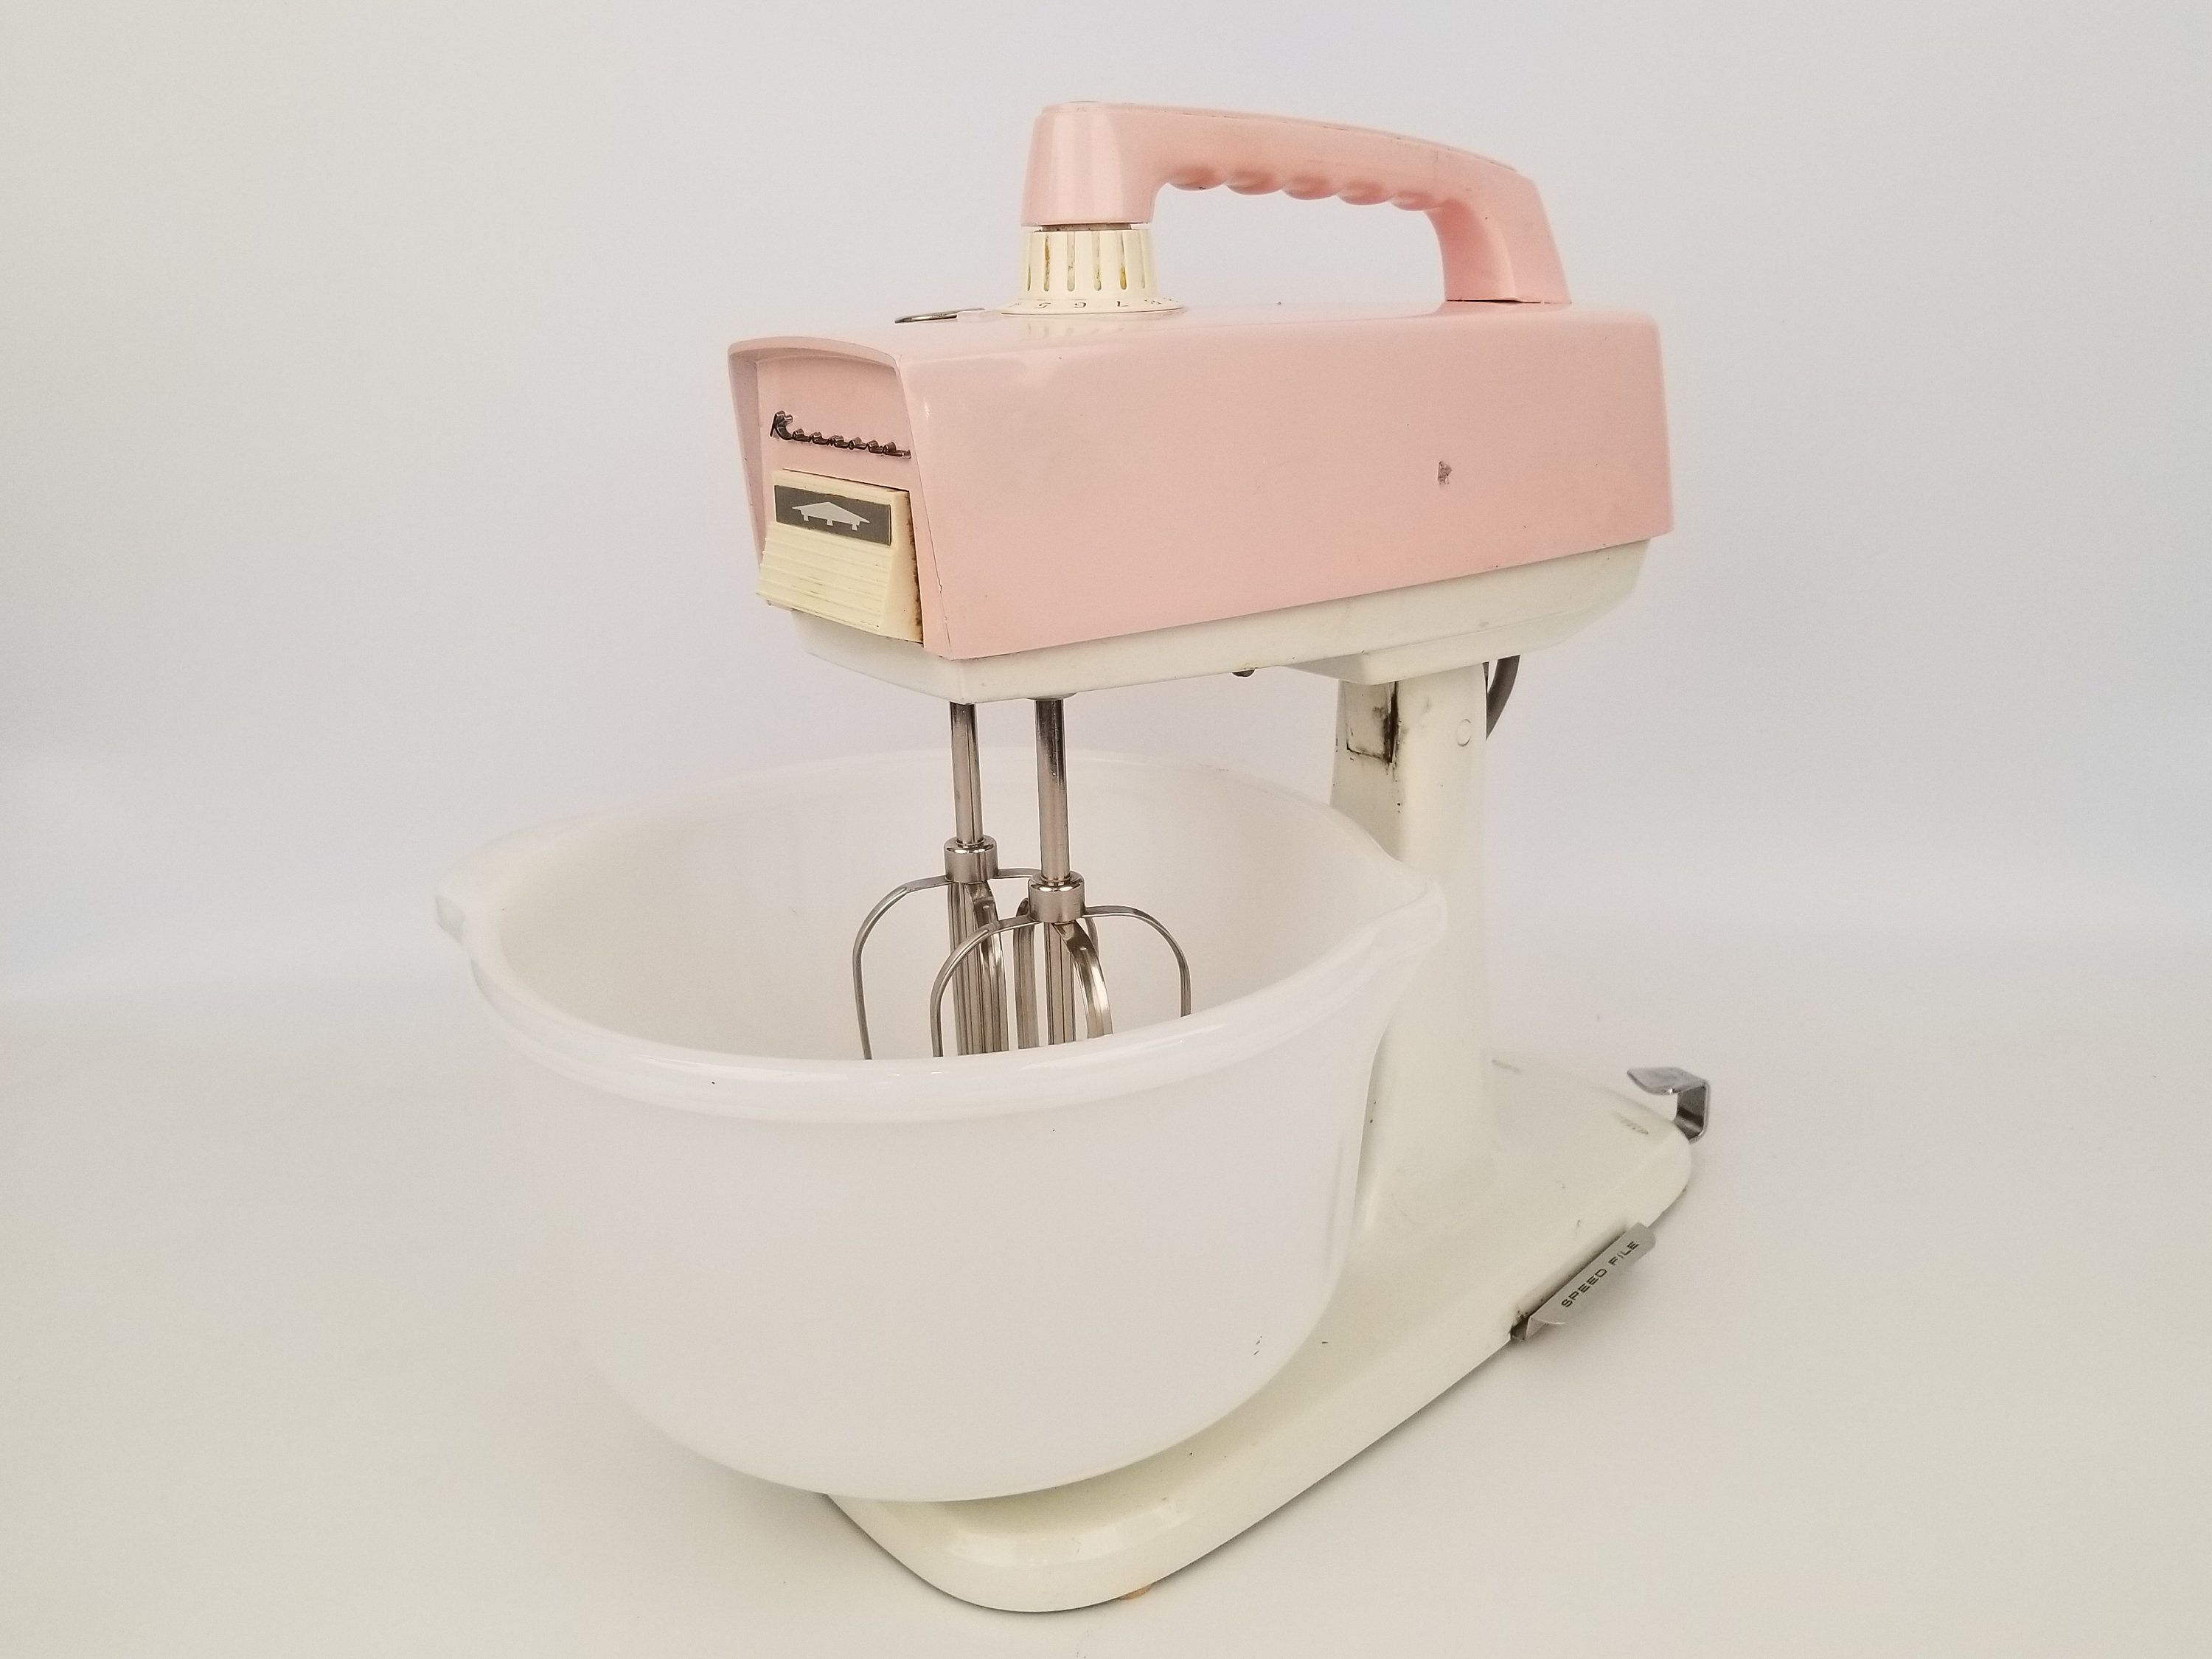 Kenmore Elite 6 qt Bowl-Lift Stand Mixer with Countdown Timer- 600